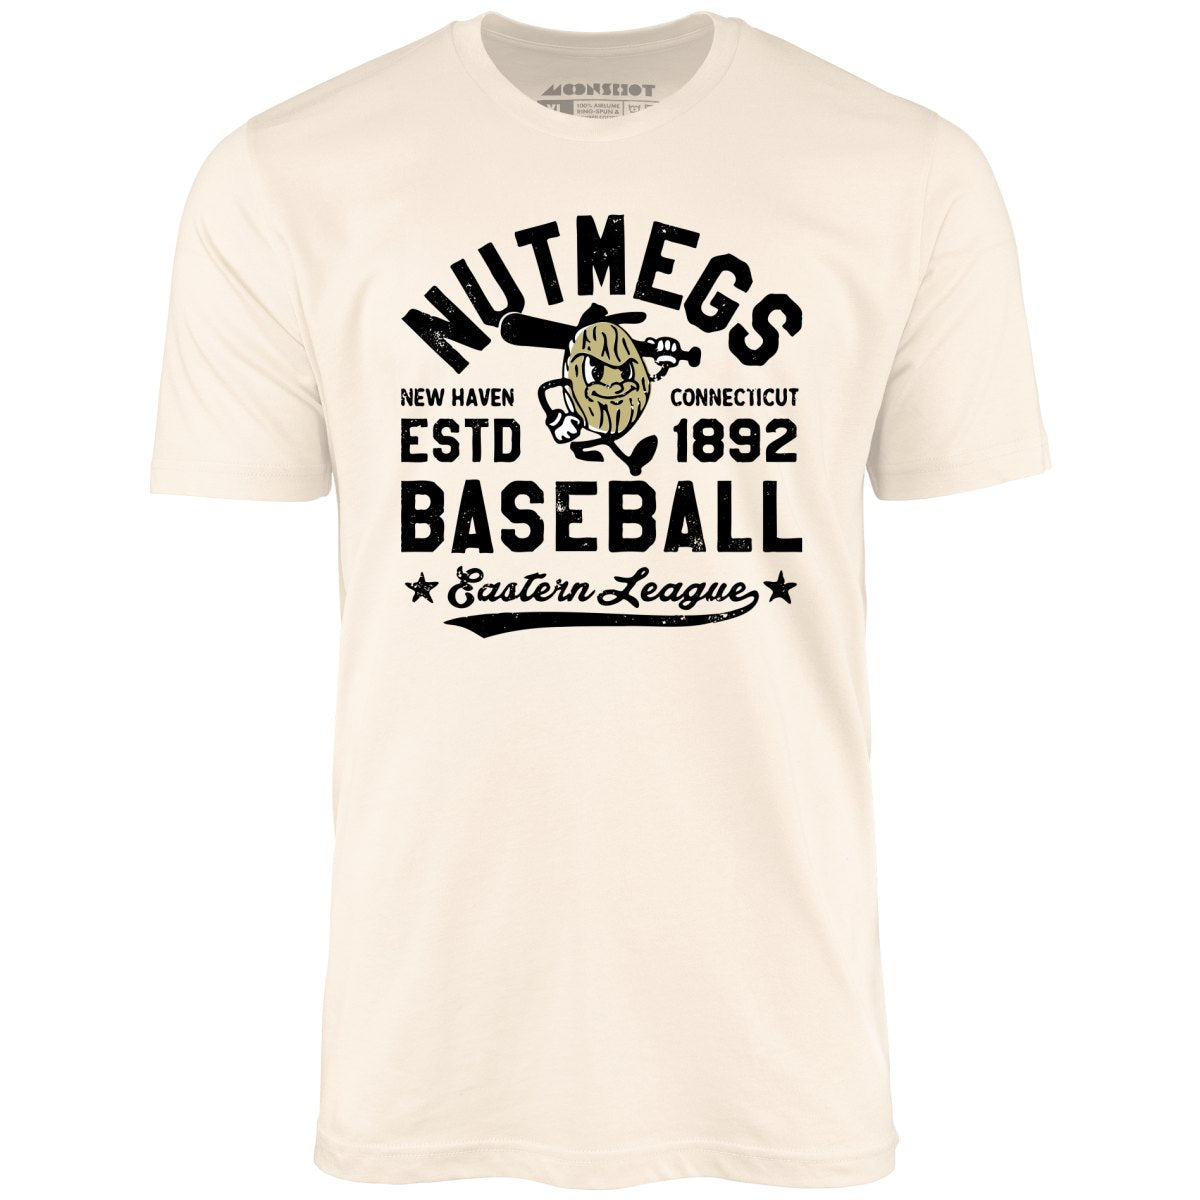 New Haven Nutmegs - Connecticut - Vintage Defunct Baseball Teams - Unisex T-Shirt